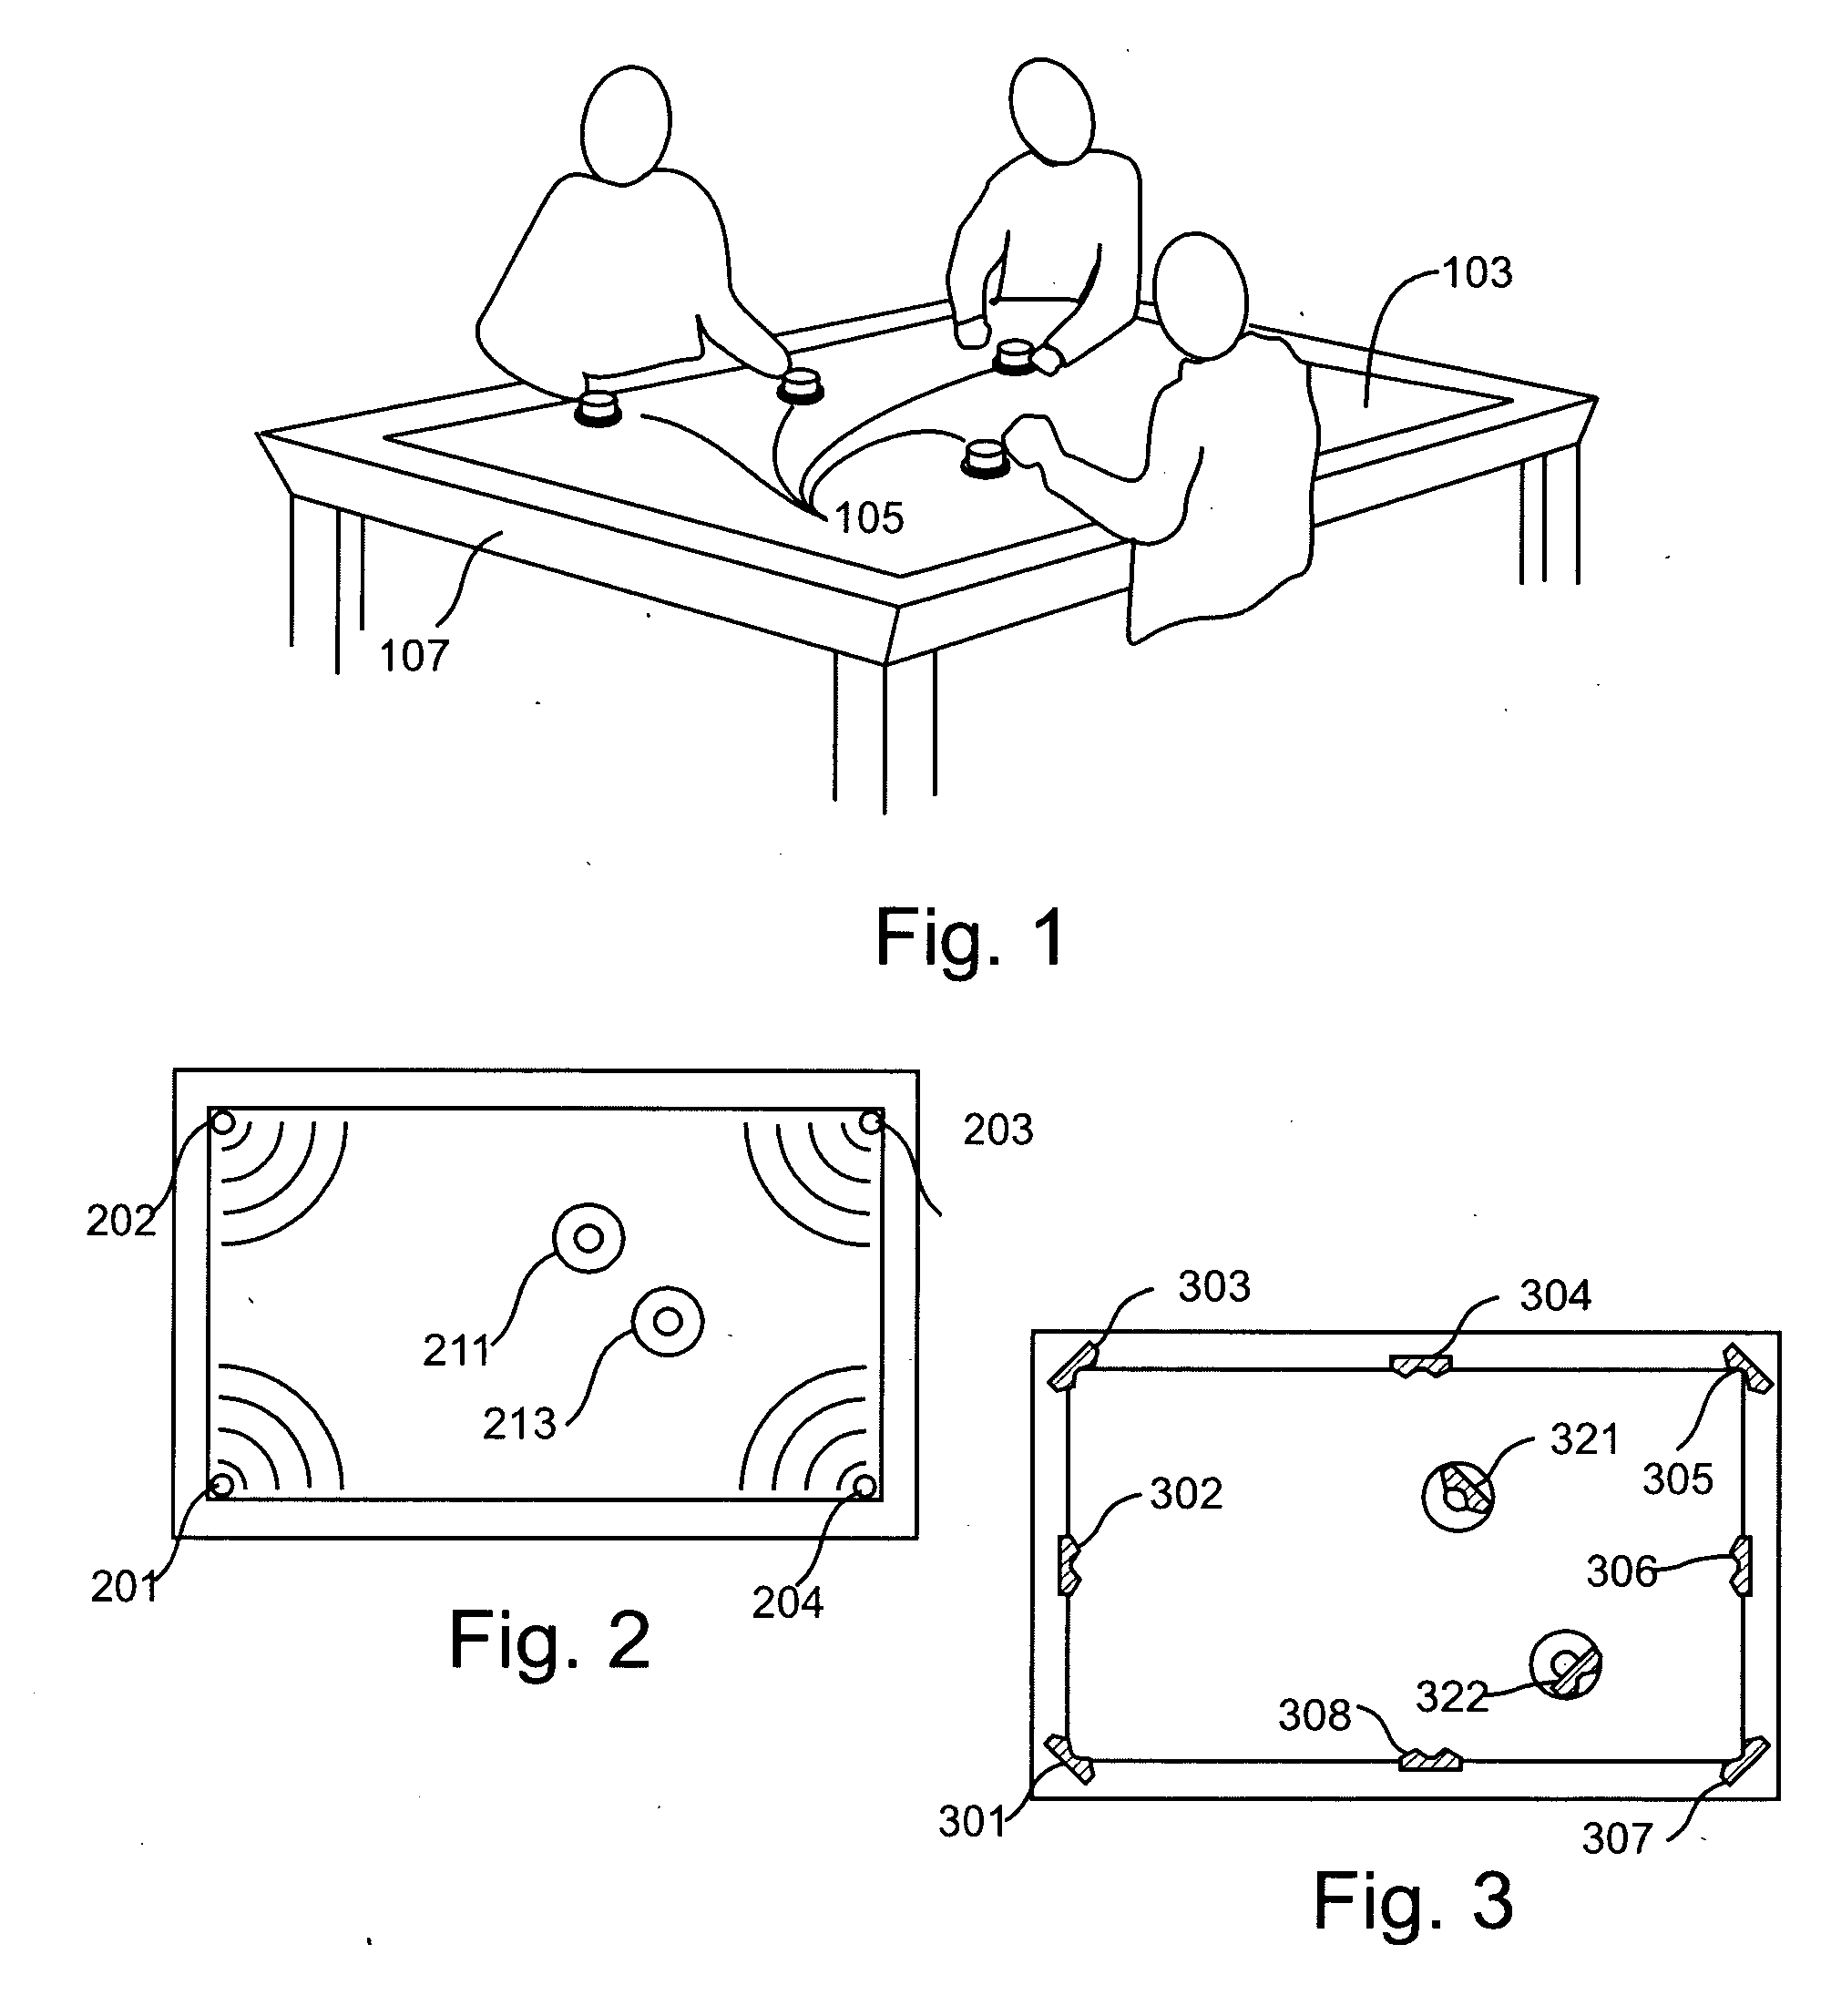 Method for object identification and sensing in a bounded interaction space